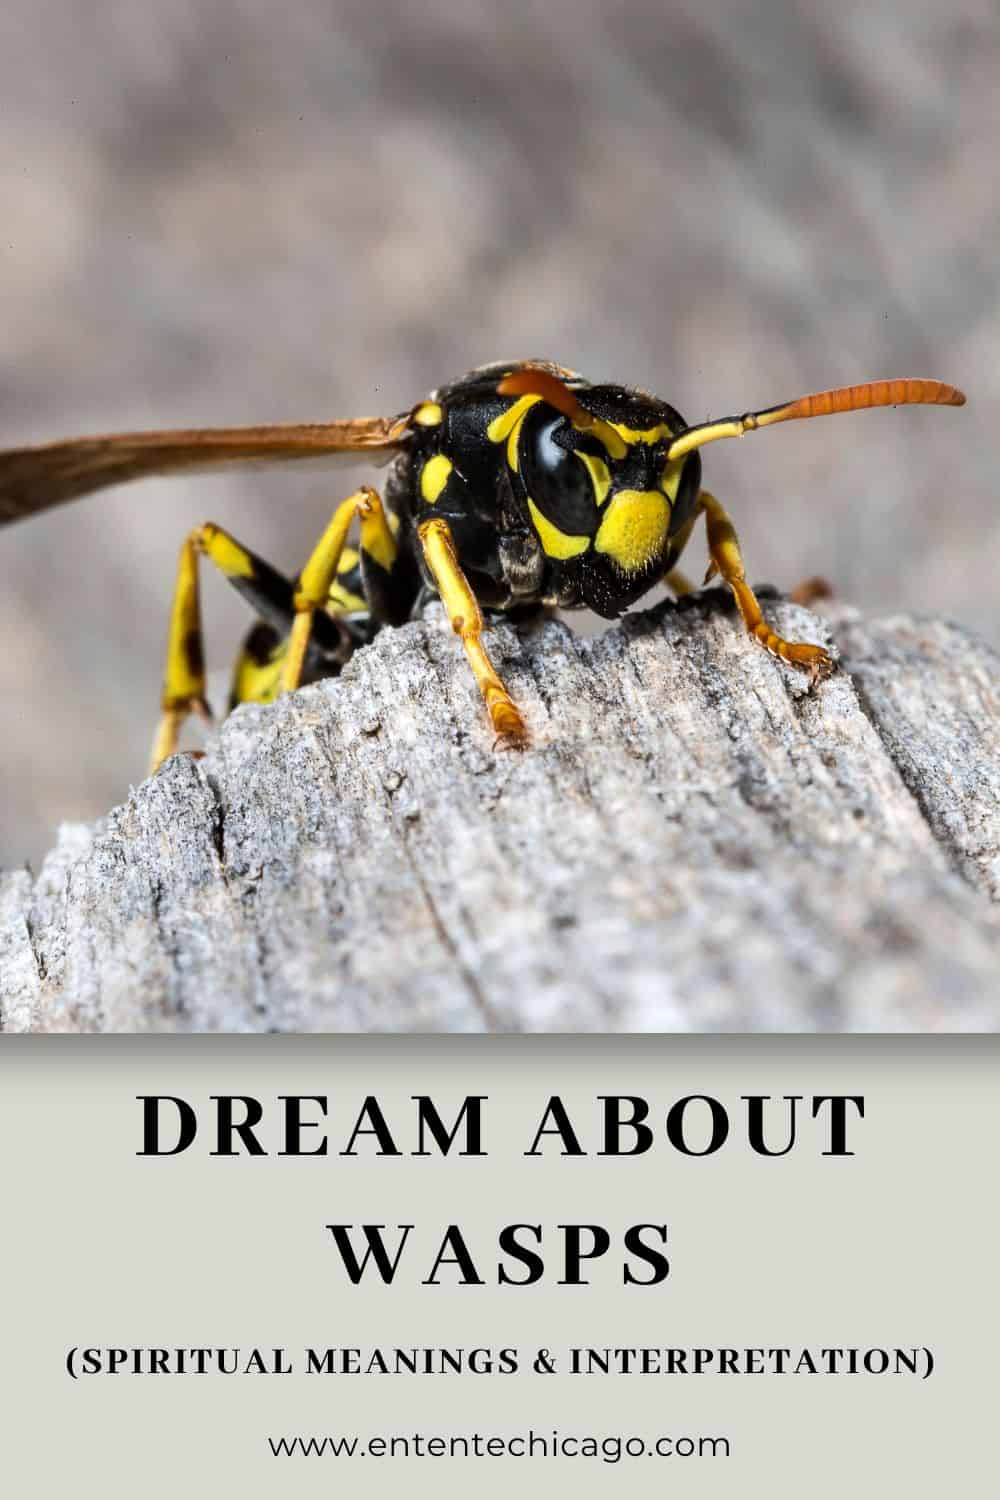 Dream About Wasps (Spiritual Meanings & Interpretation)